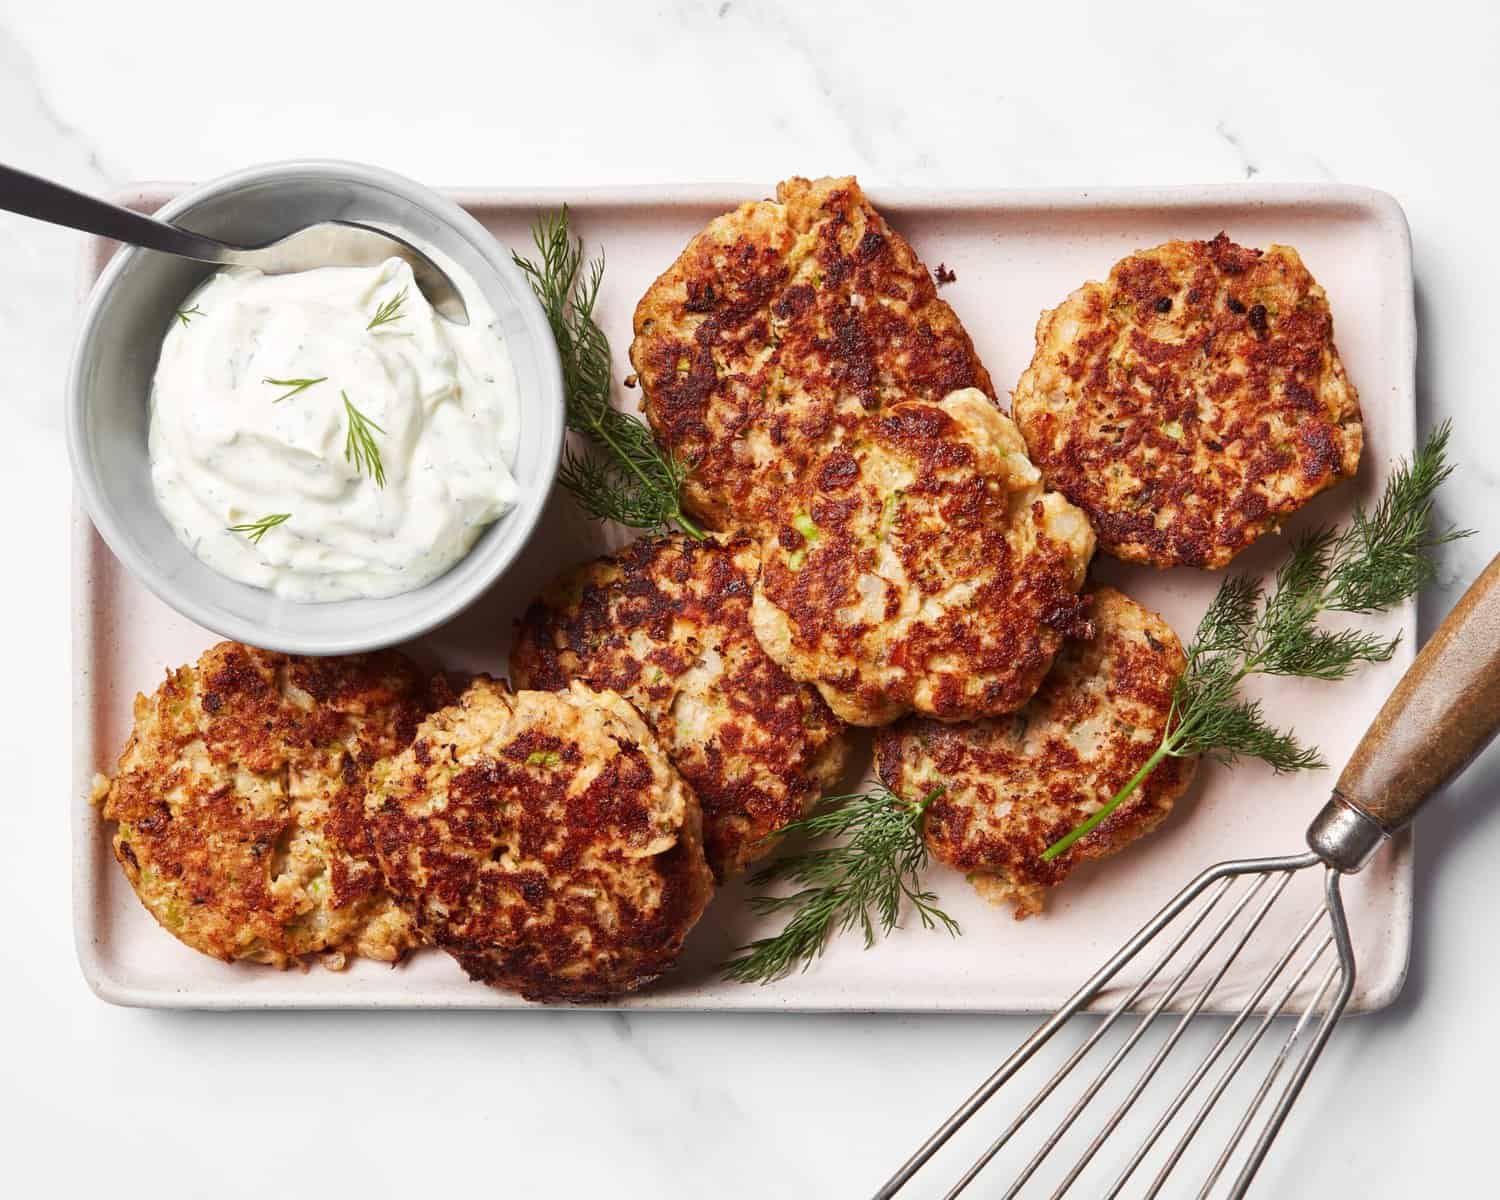  These salmon croquettes are the perfect Passover appetizer or main course.